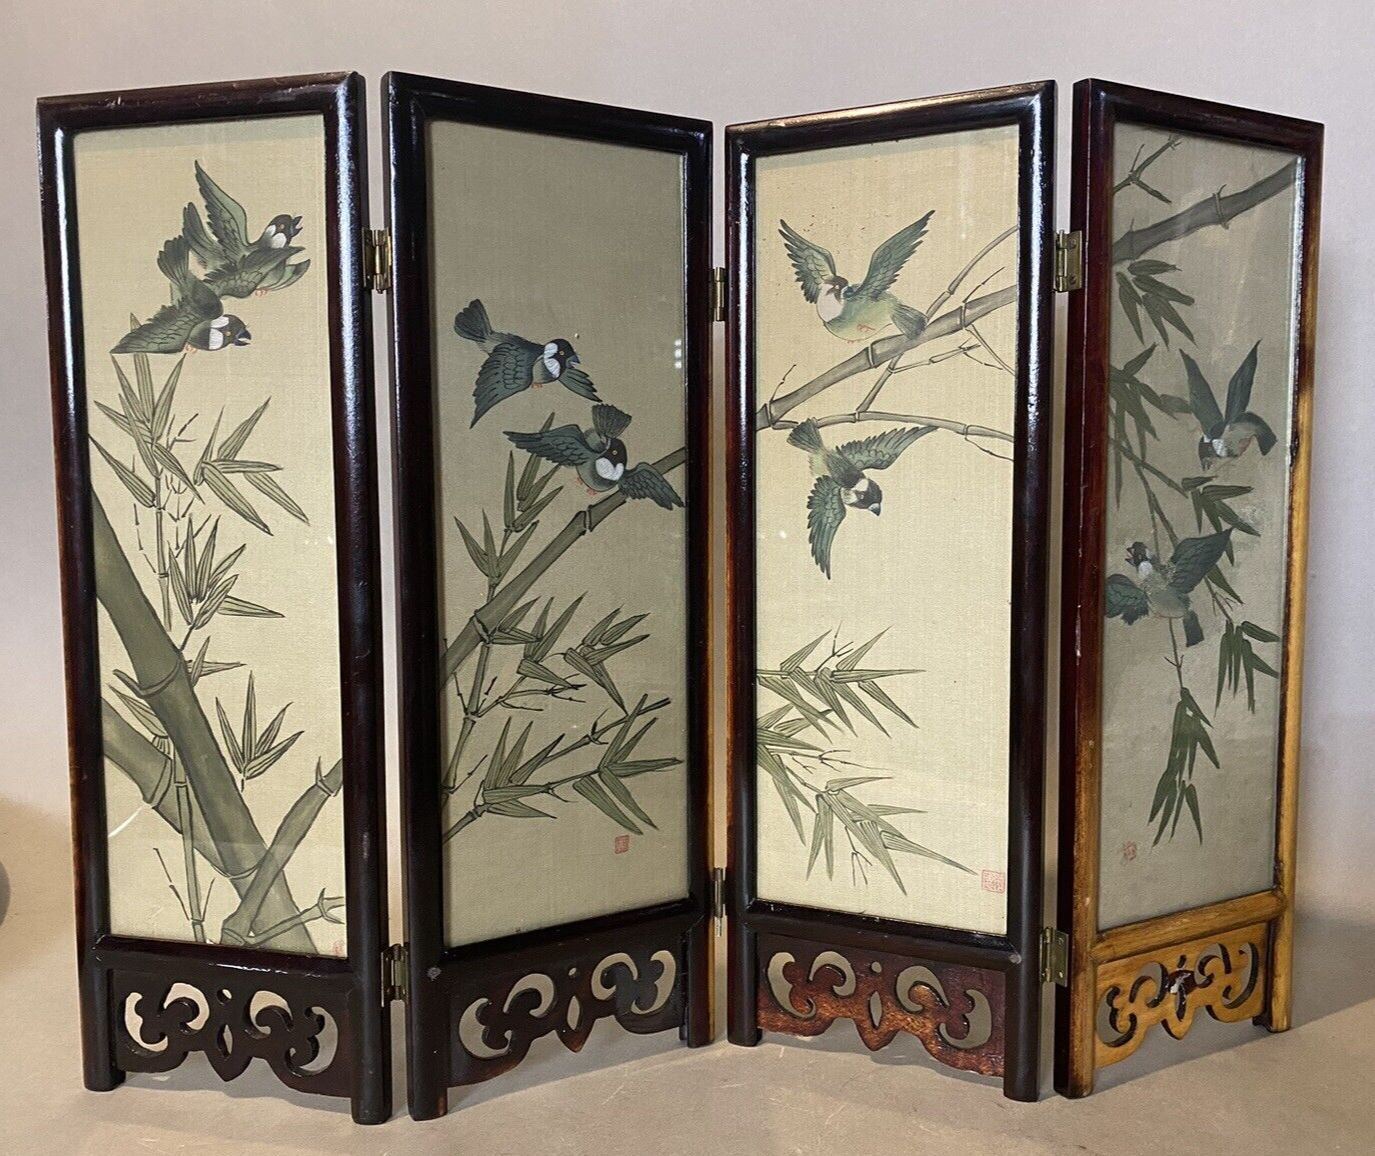 Vintage Oriental Scenic Folding Table Screen with Landscapes & Birds